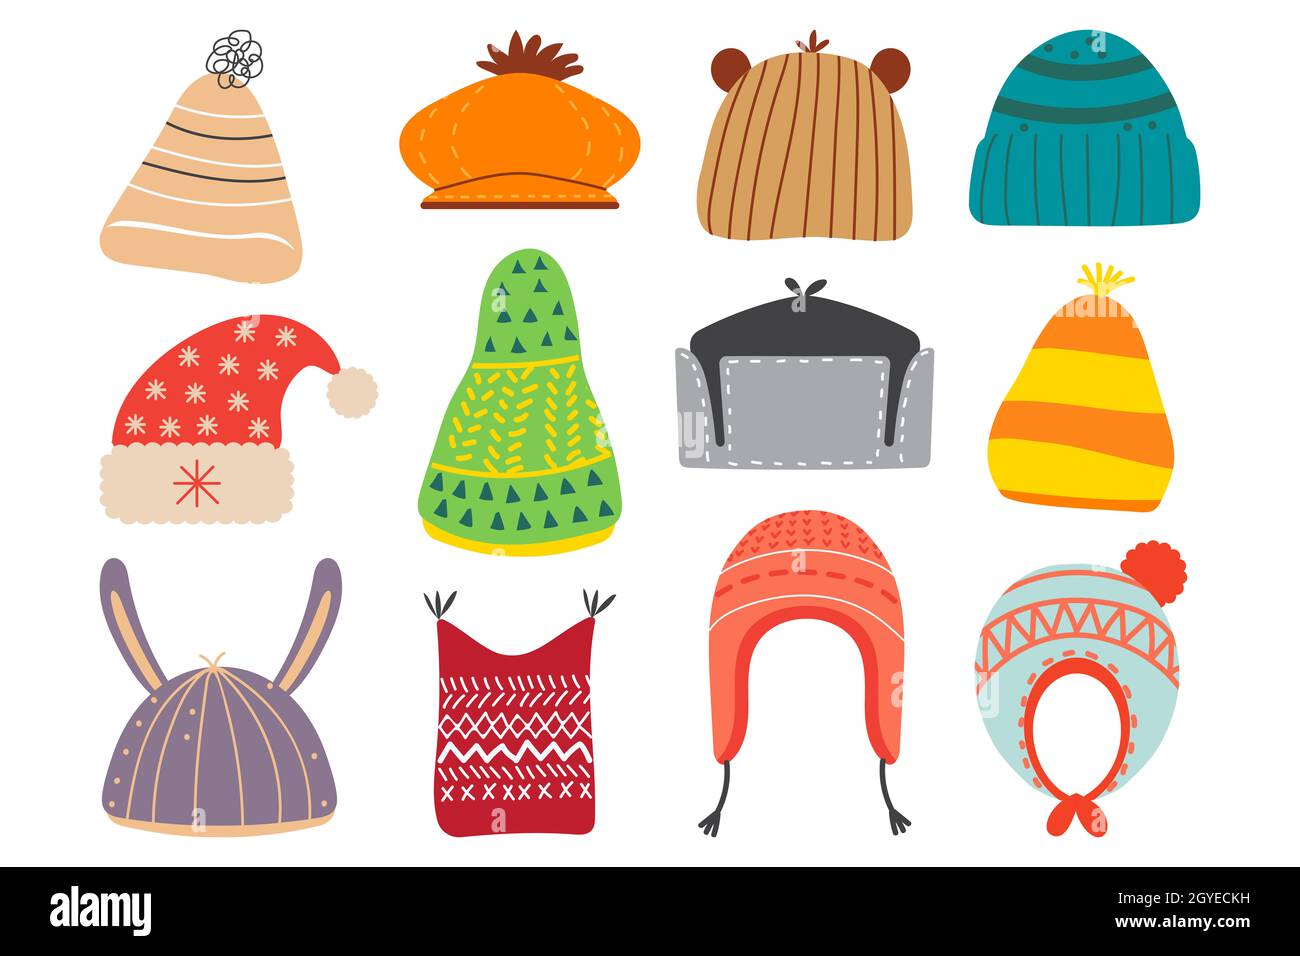 Winter hats doodle set. Collection of colourful woolen cotton knitting autumnal wintry headwear for kids. Childish knitted autumn garment accessories Stock Photo